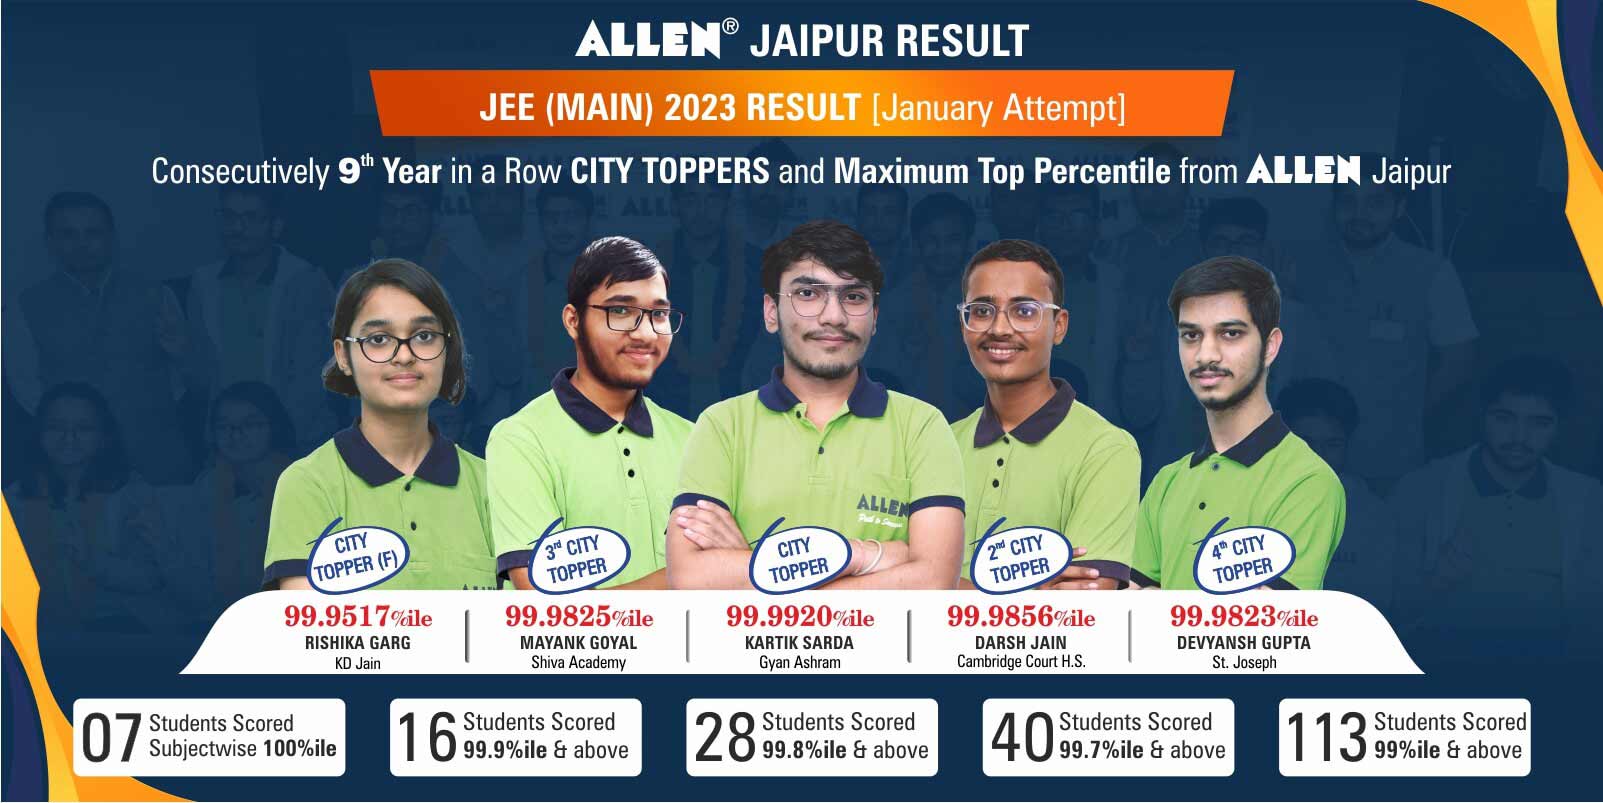 JEE (Main) 2023 January Attempt Result_09Feb_1845